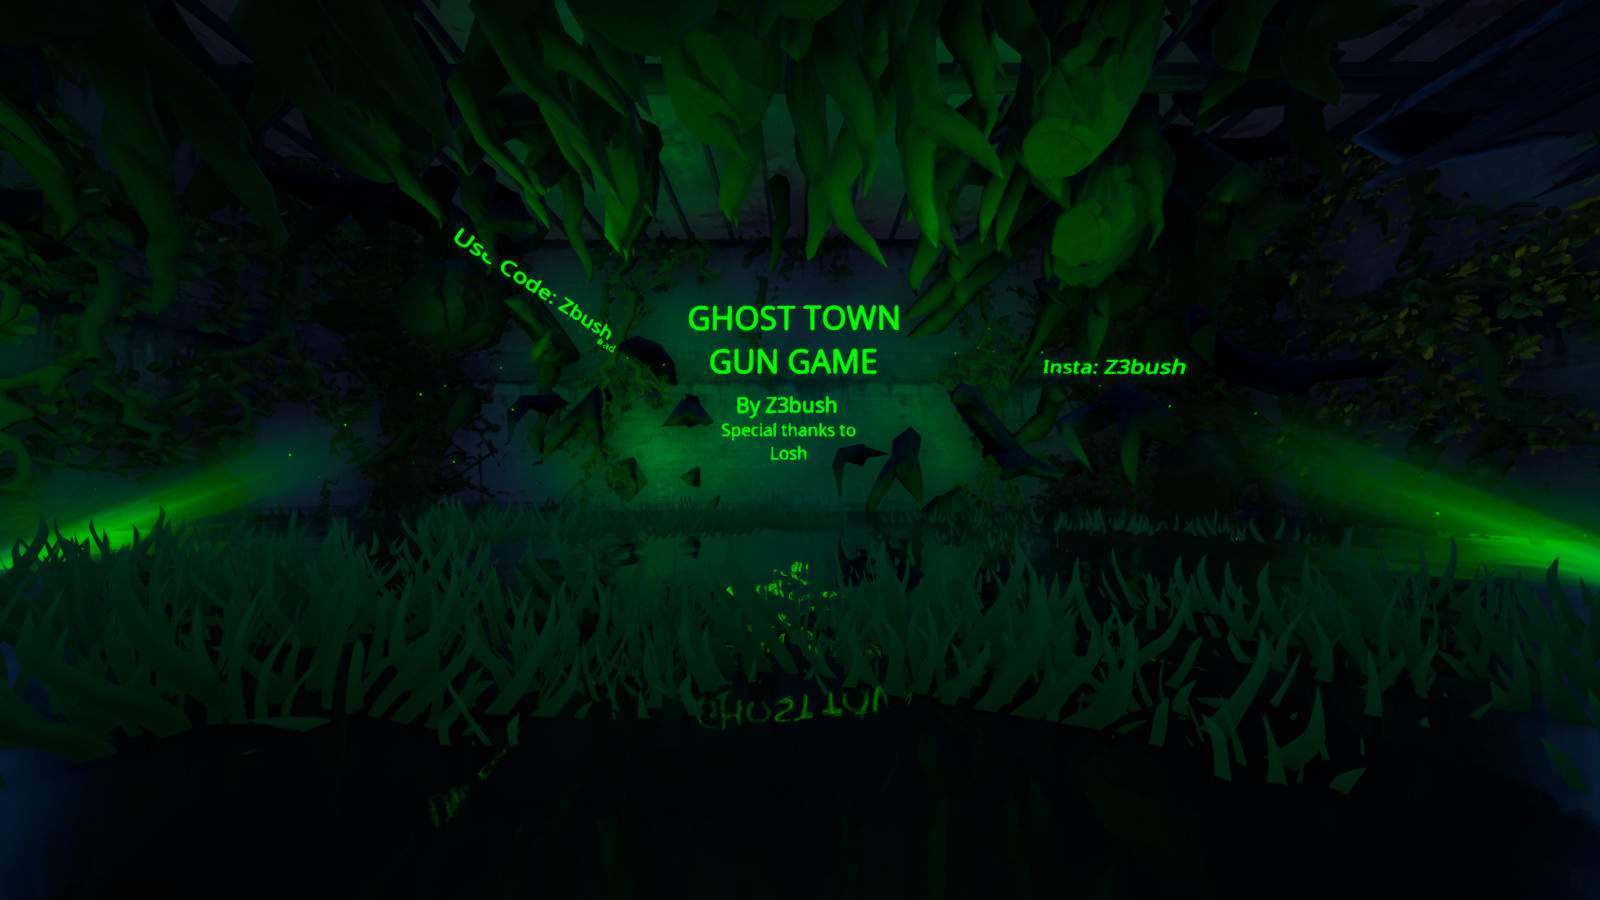 GHOST TOWN GUNGAME